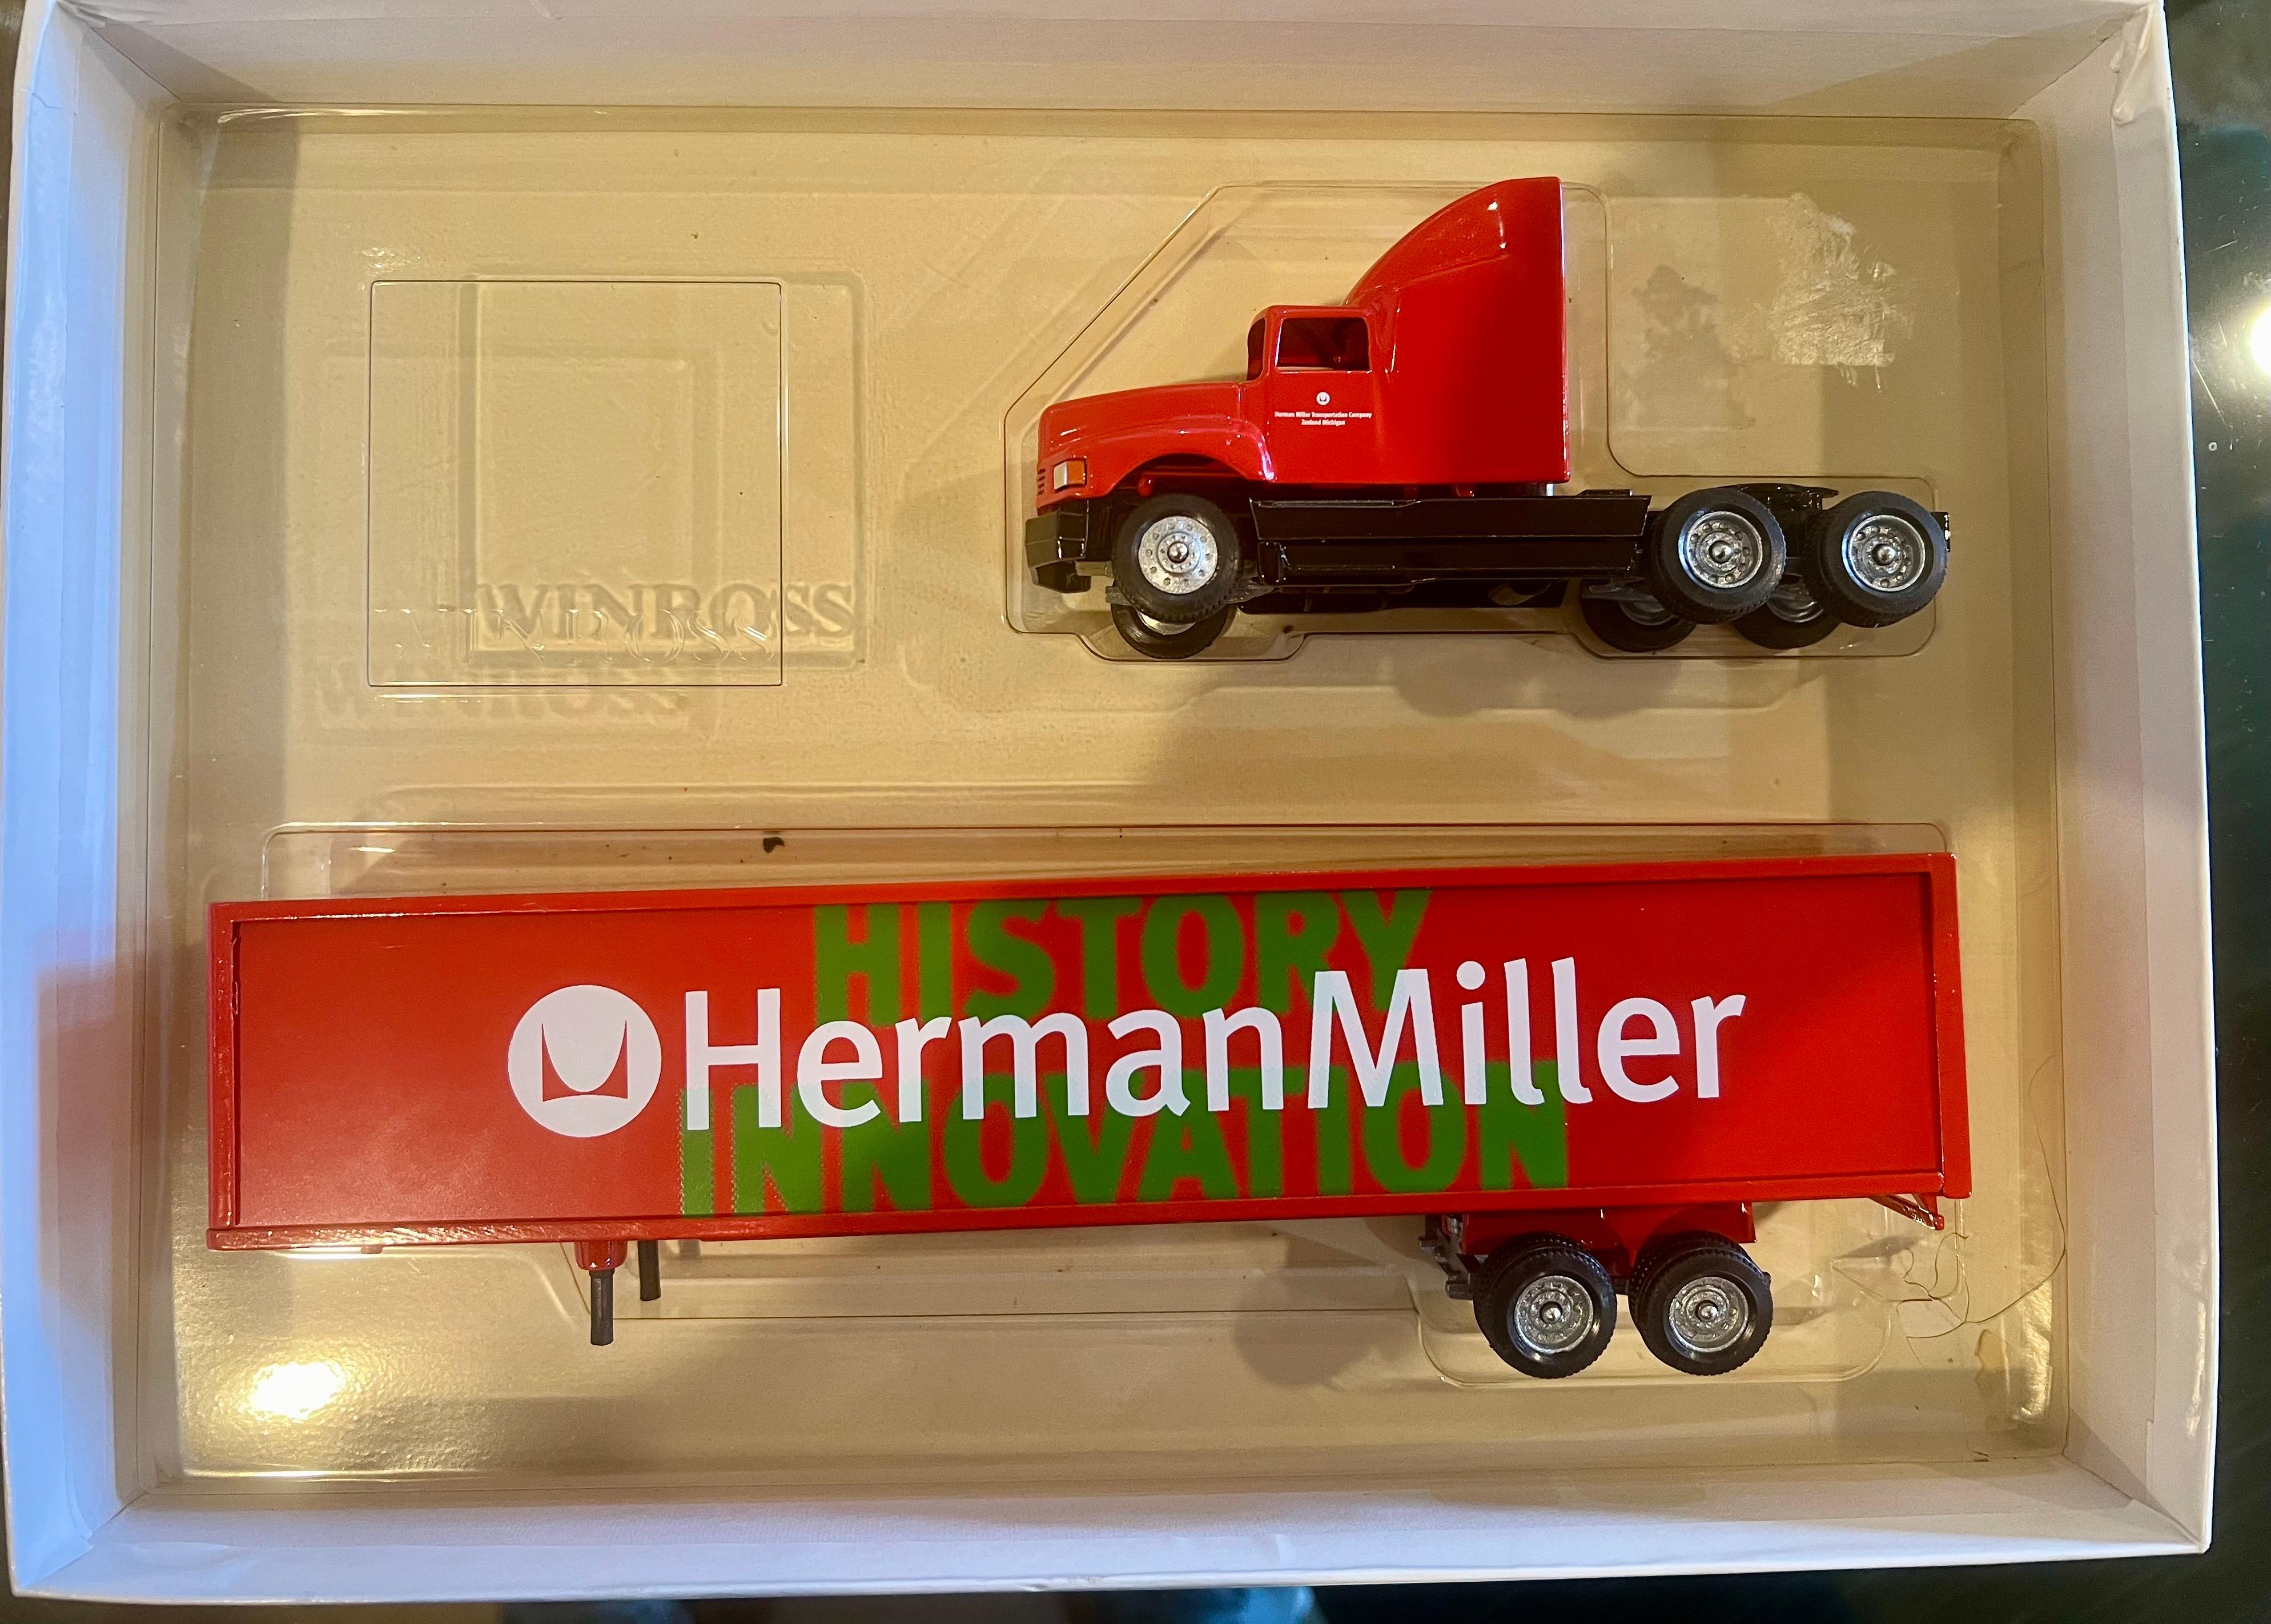 Very cool original rare Truck very collectible with Herman Miller logo , circa 1980's excellent condition original box great for any Mid Century Danish Modern collector.